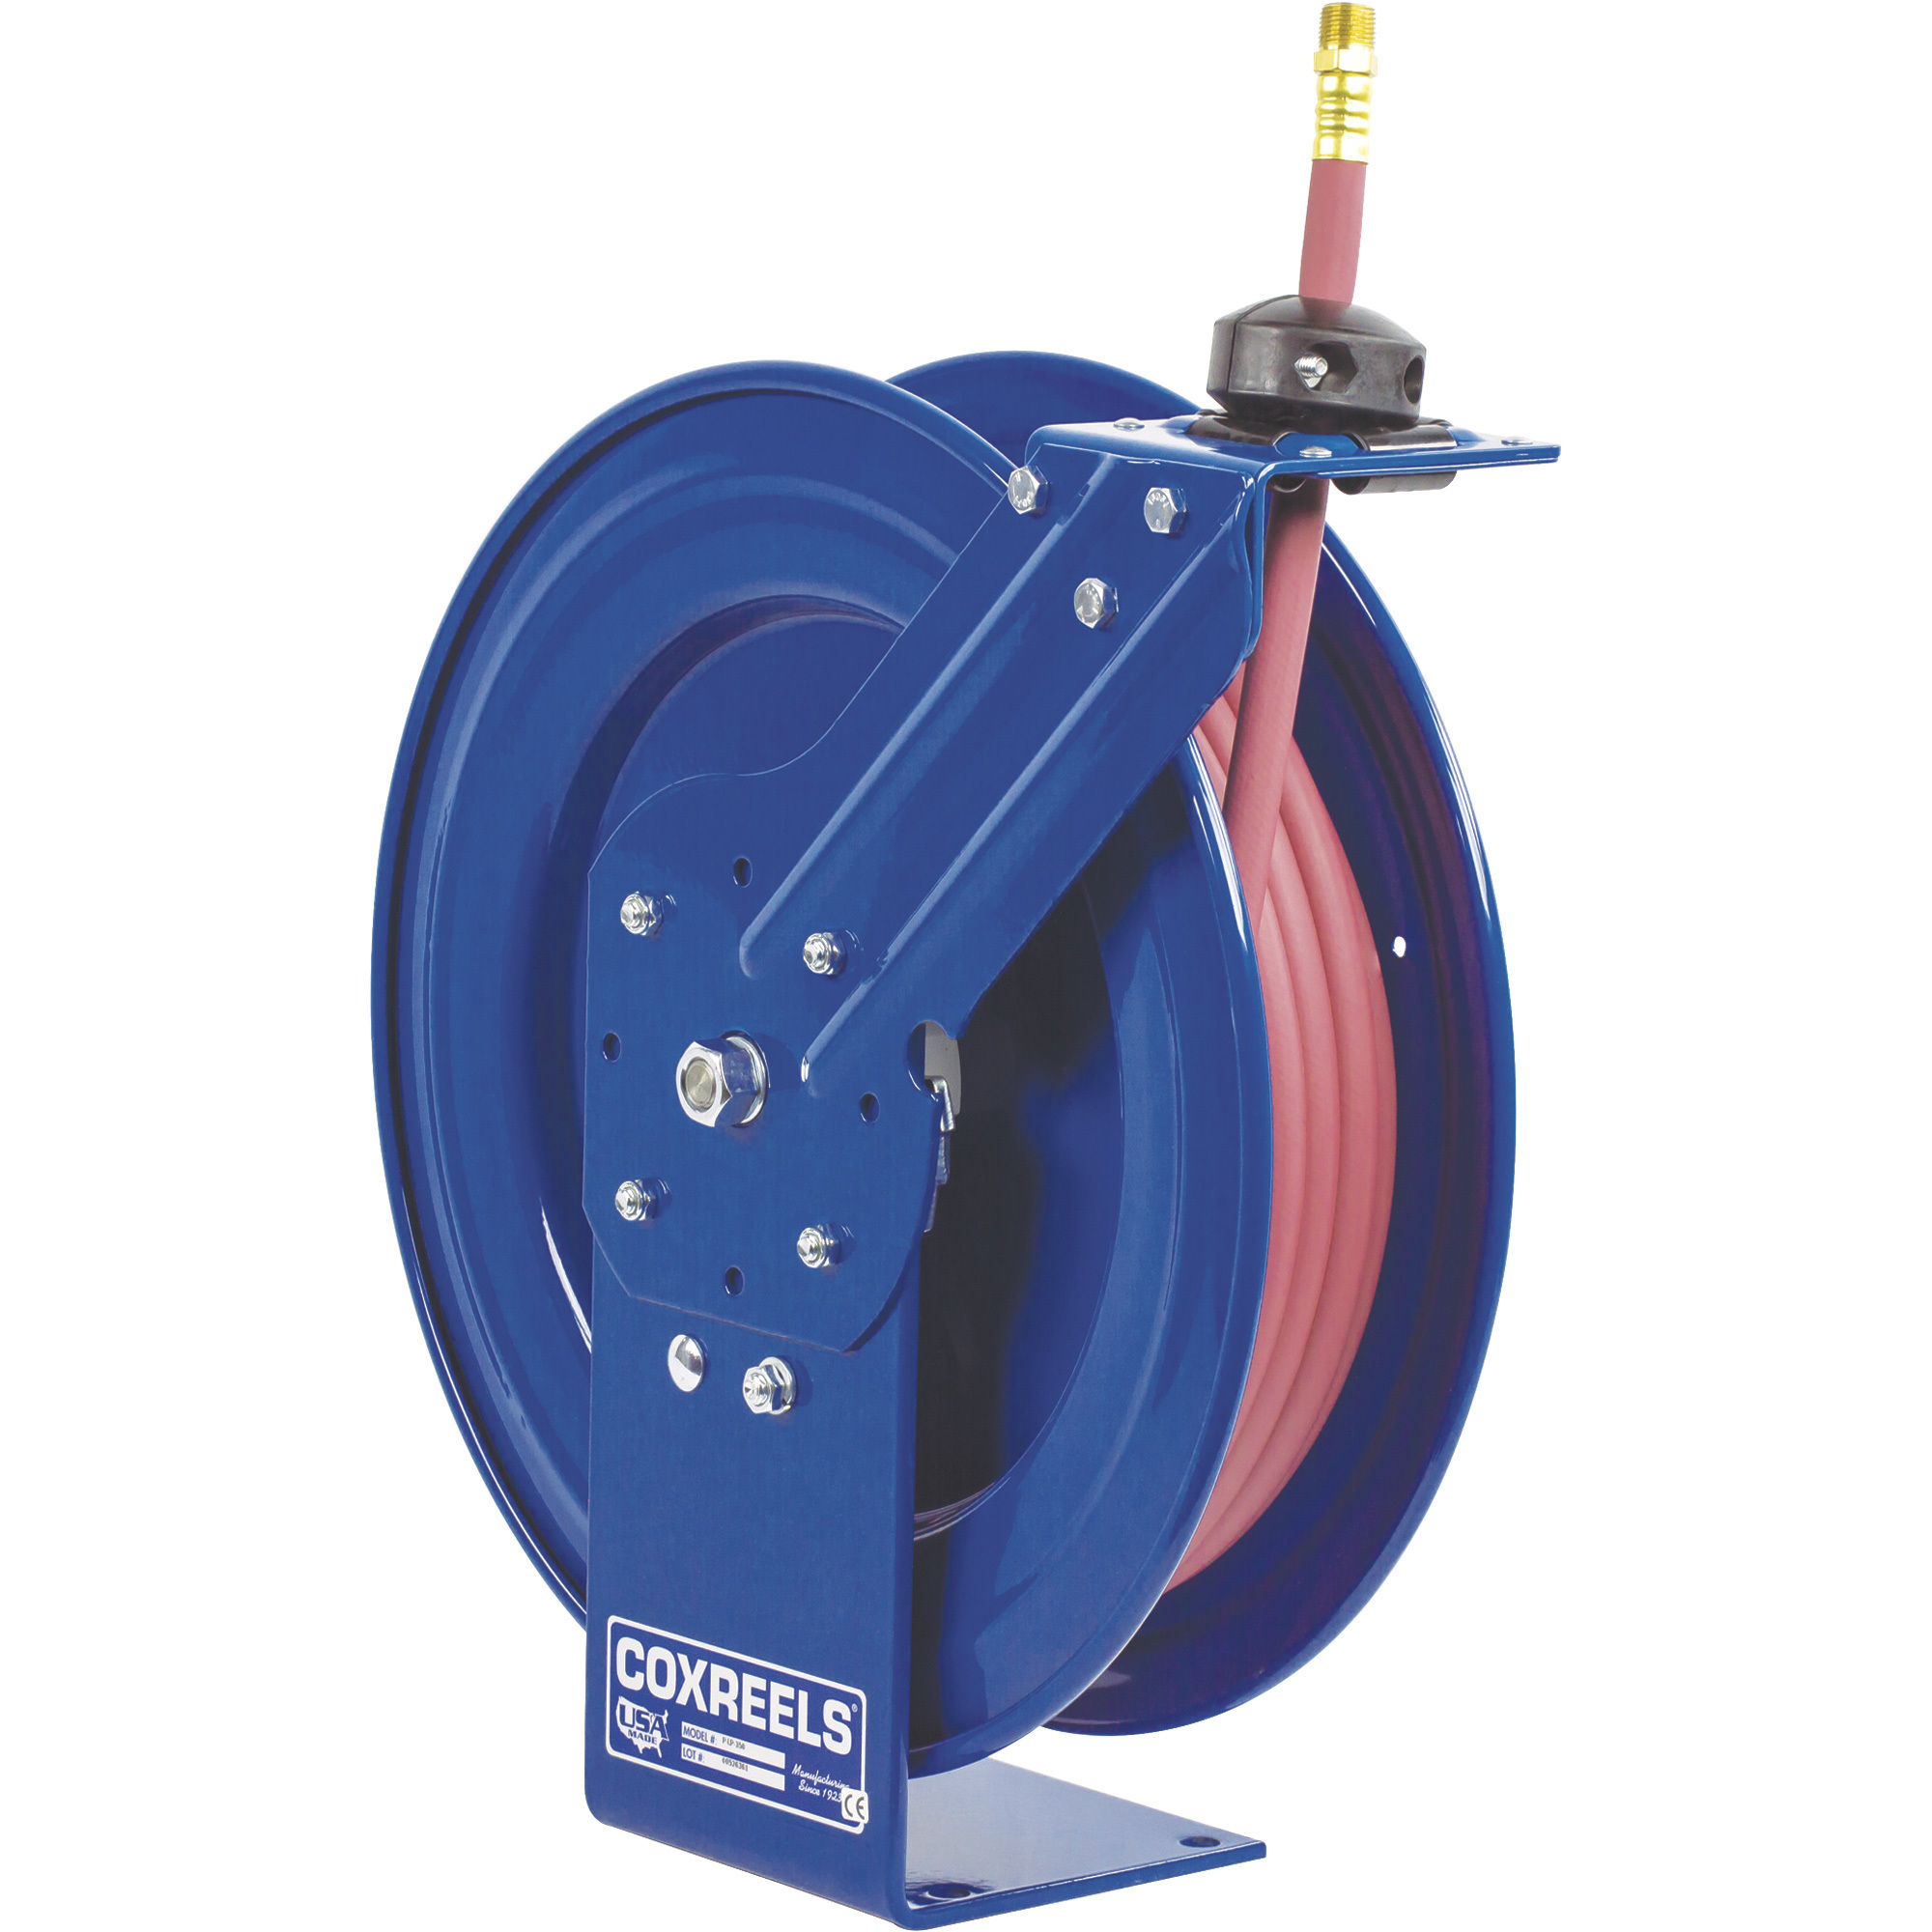 Coxreels P Series Air/Water Hose Reel, With 1/2Inch x 25ft. PVC Hose, Max. 300 PSI, Model P-LP-425